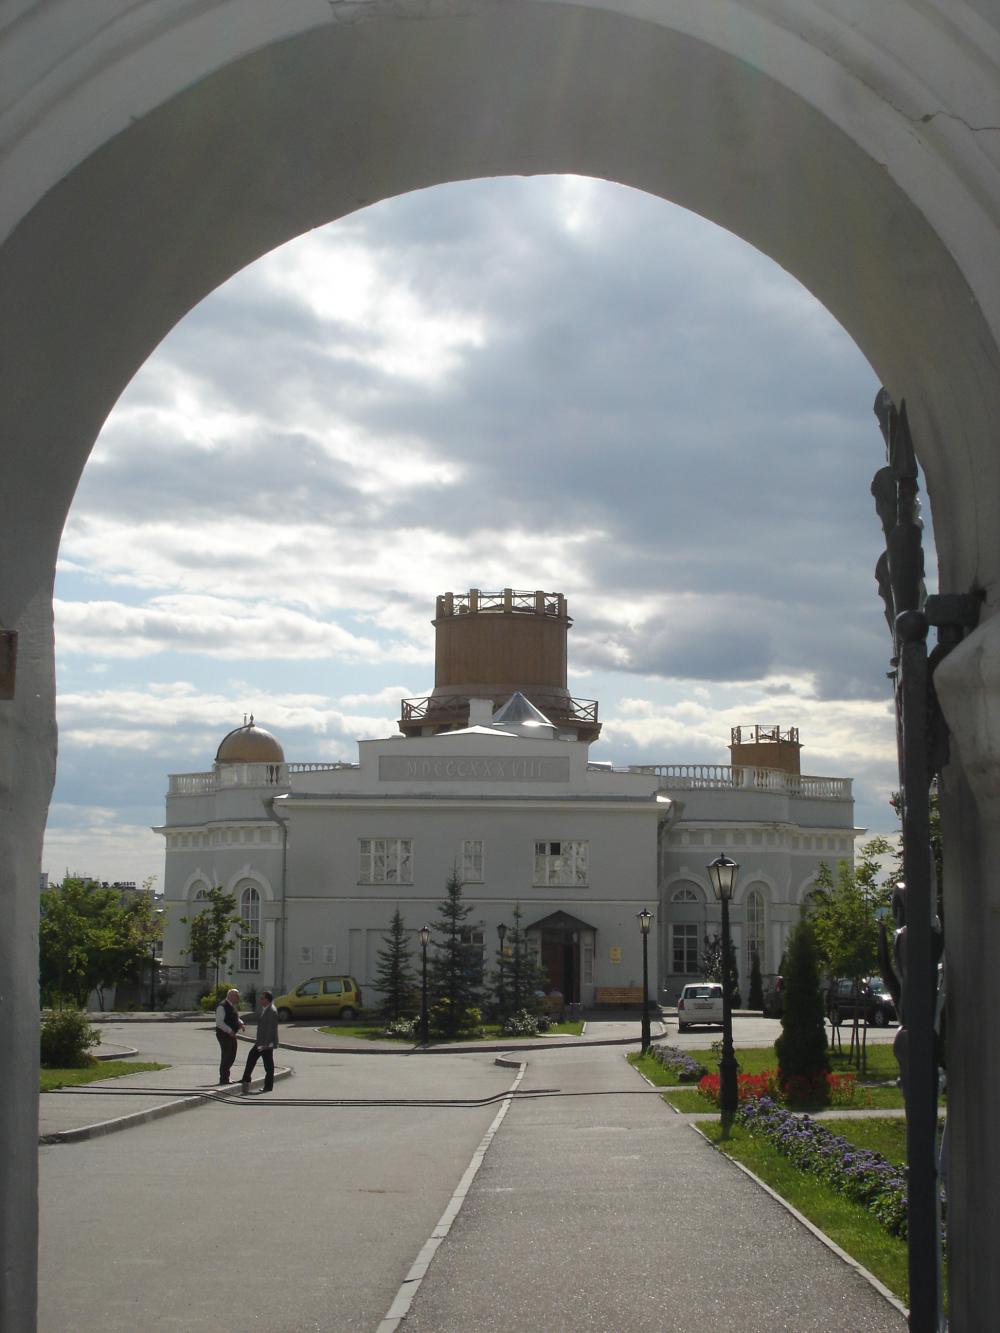 Old Observatory in Kazan (founded in 1810, built 1